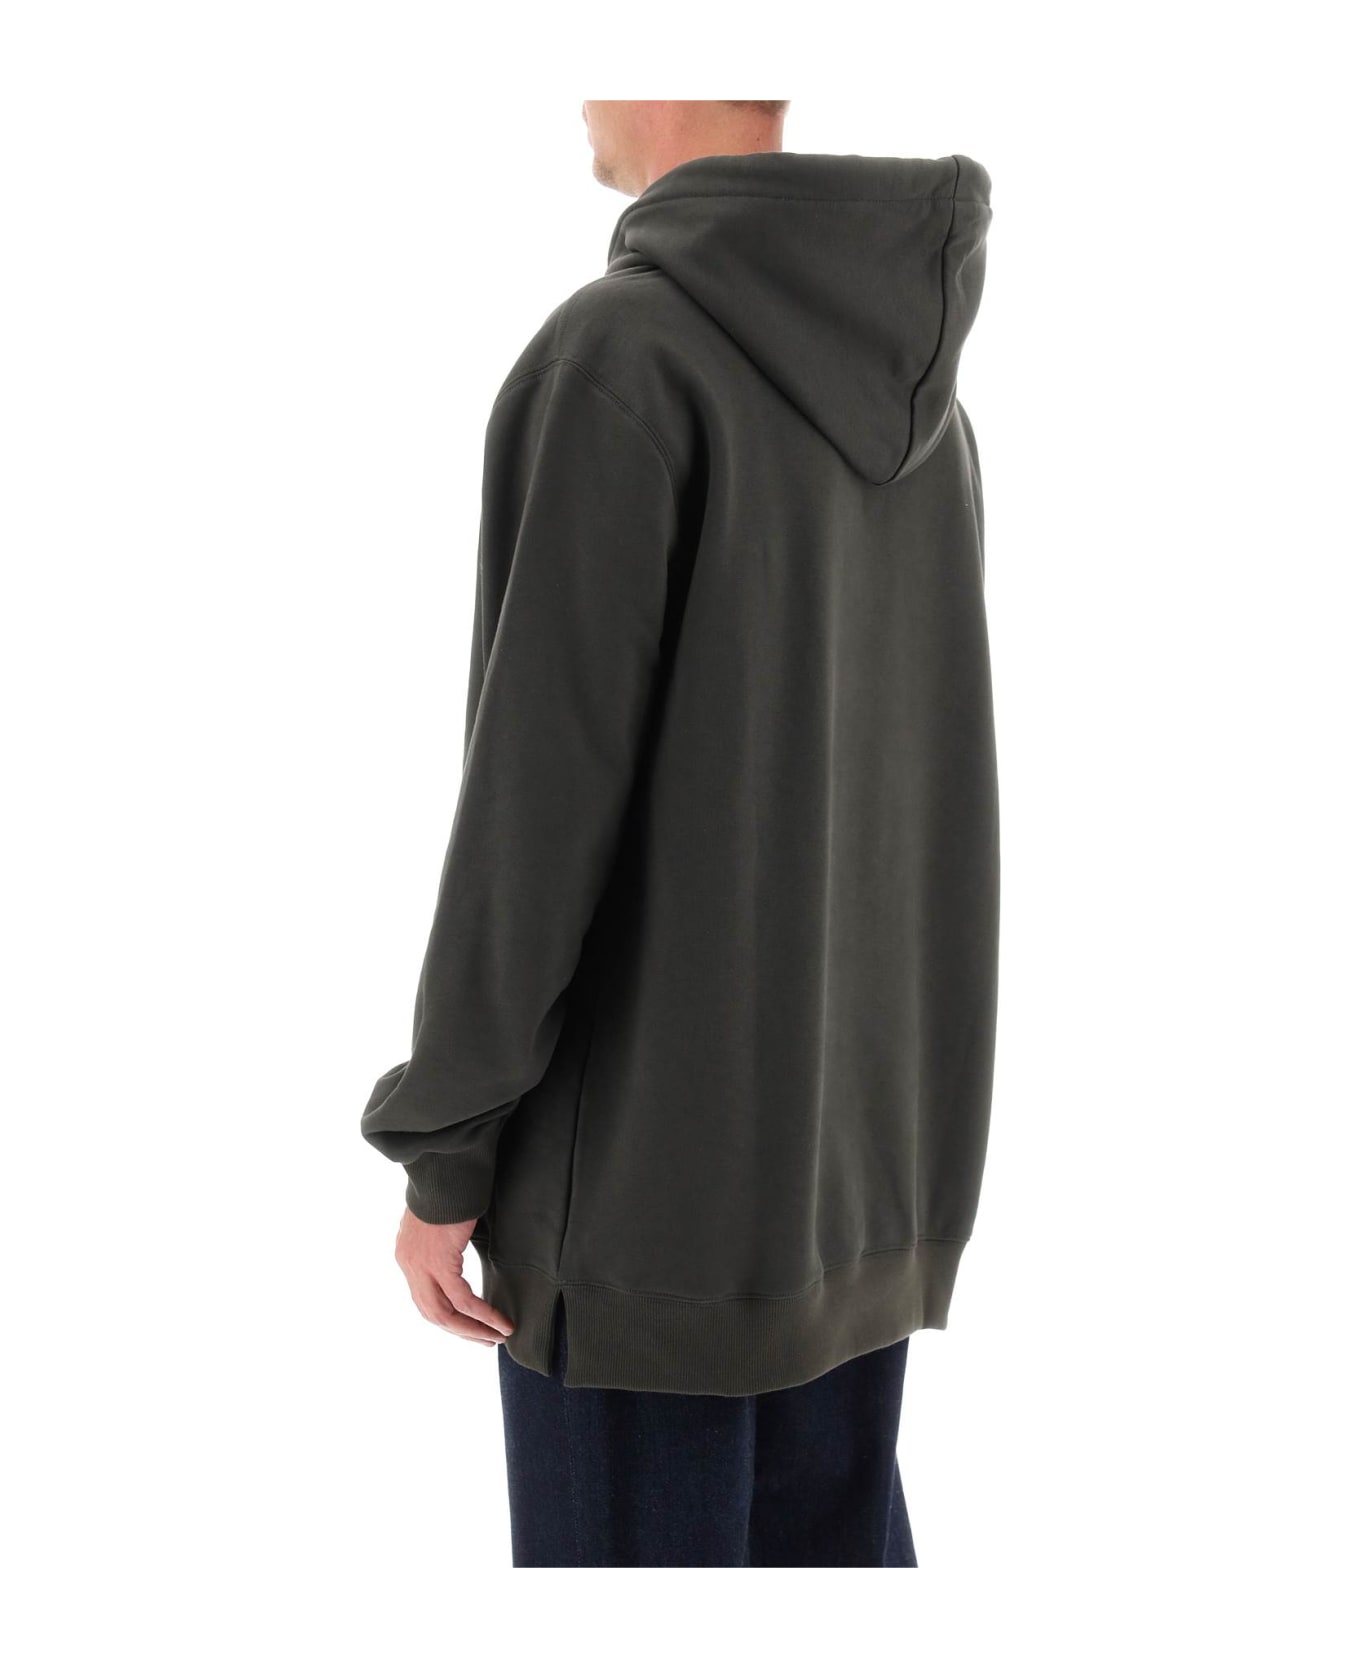 Lanvin Hoodie With Curb Embroidery - GREY フリース